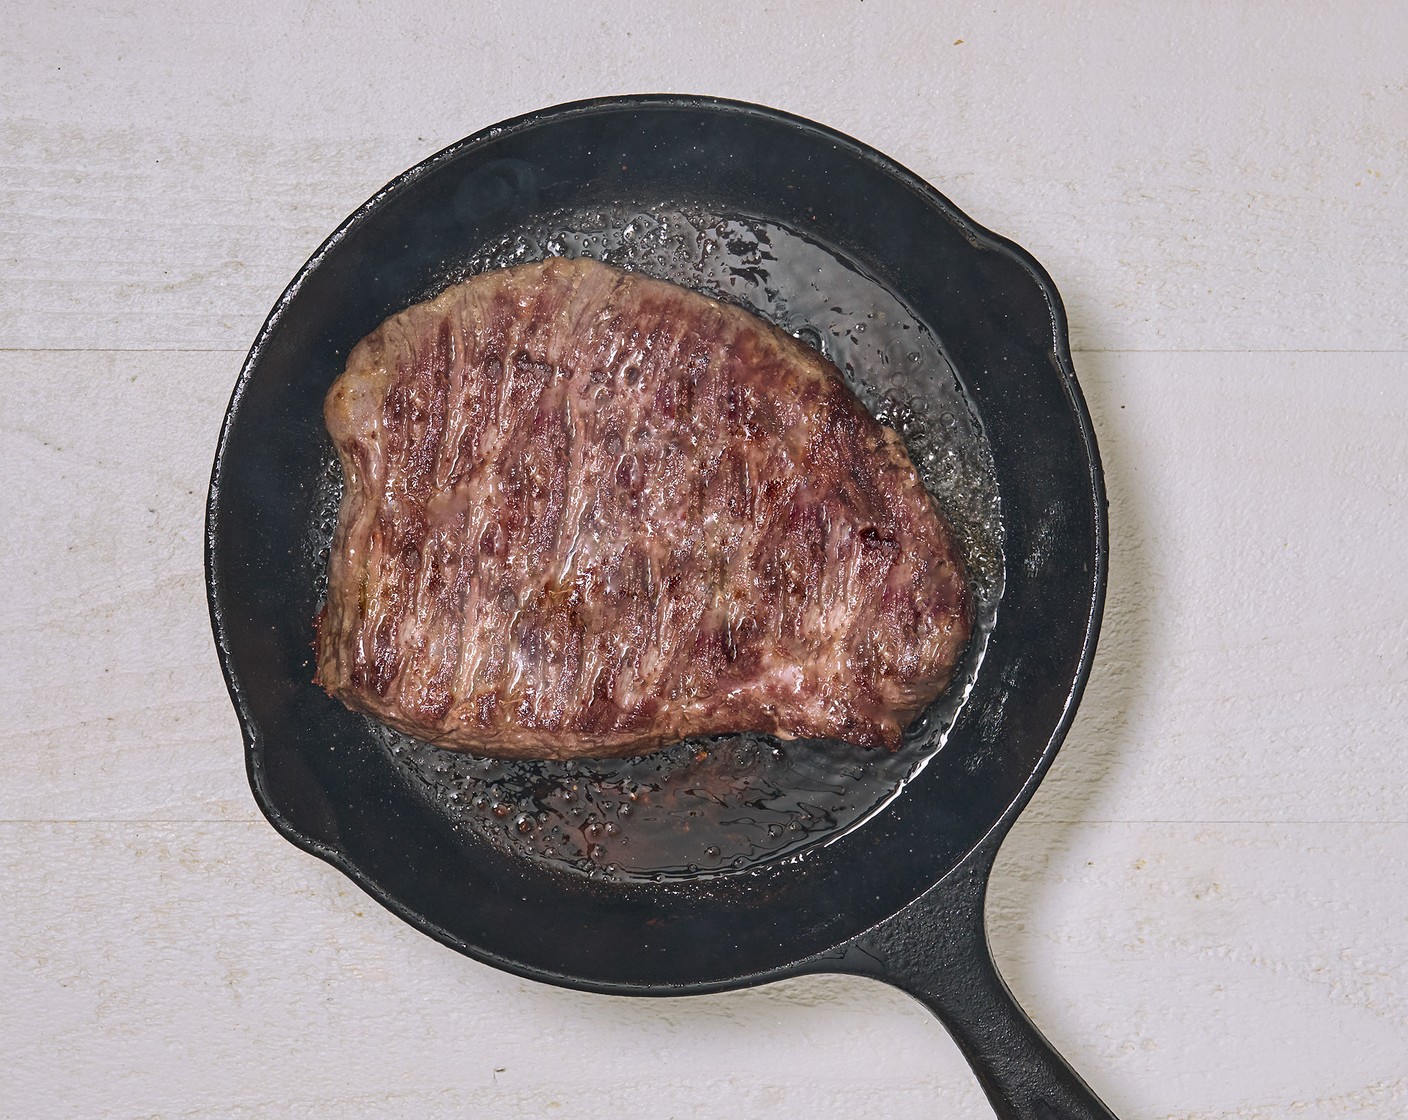 step 2 Heat a skillet and sear the steak on both sides for 3 minutes. Set the steak aside and let it rest while preparing the romaine.